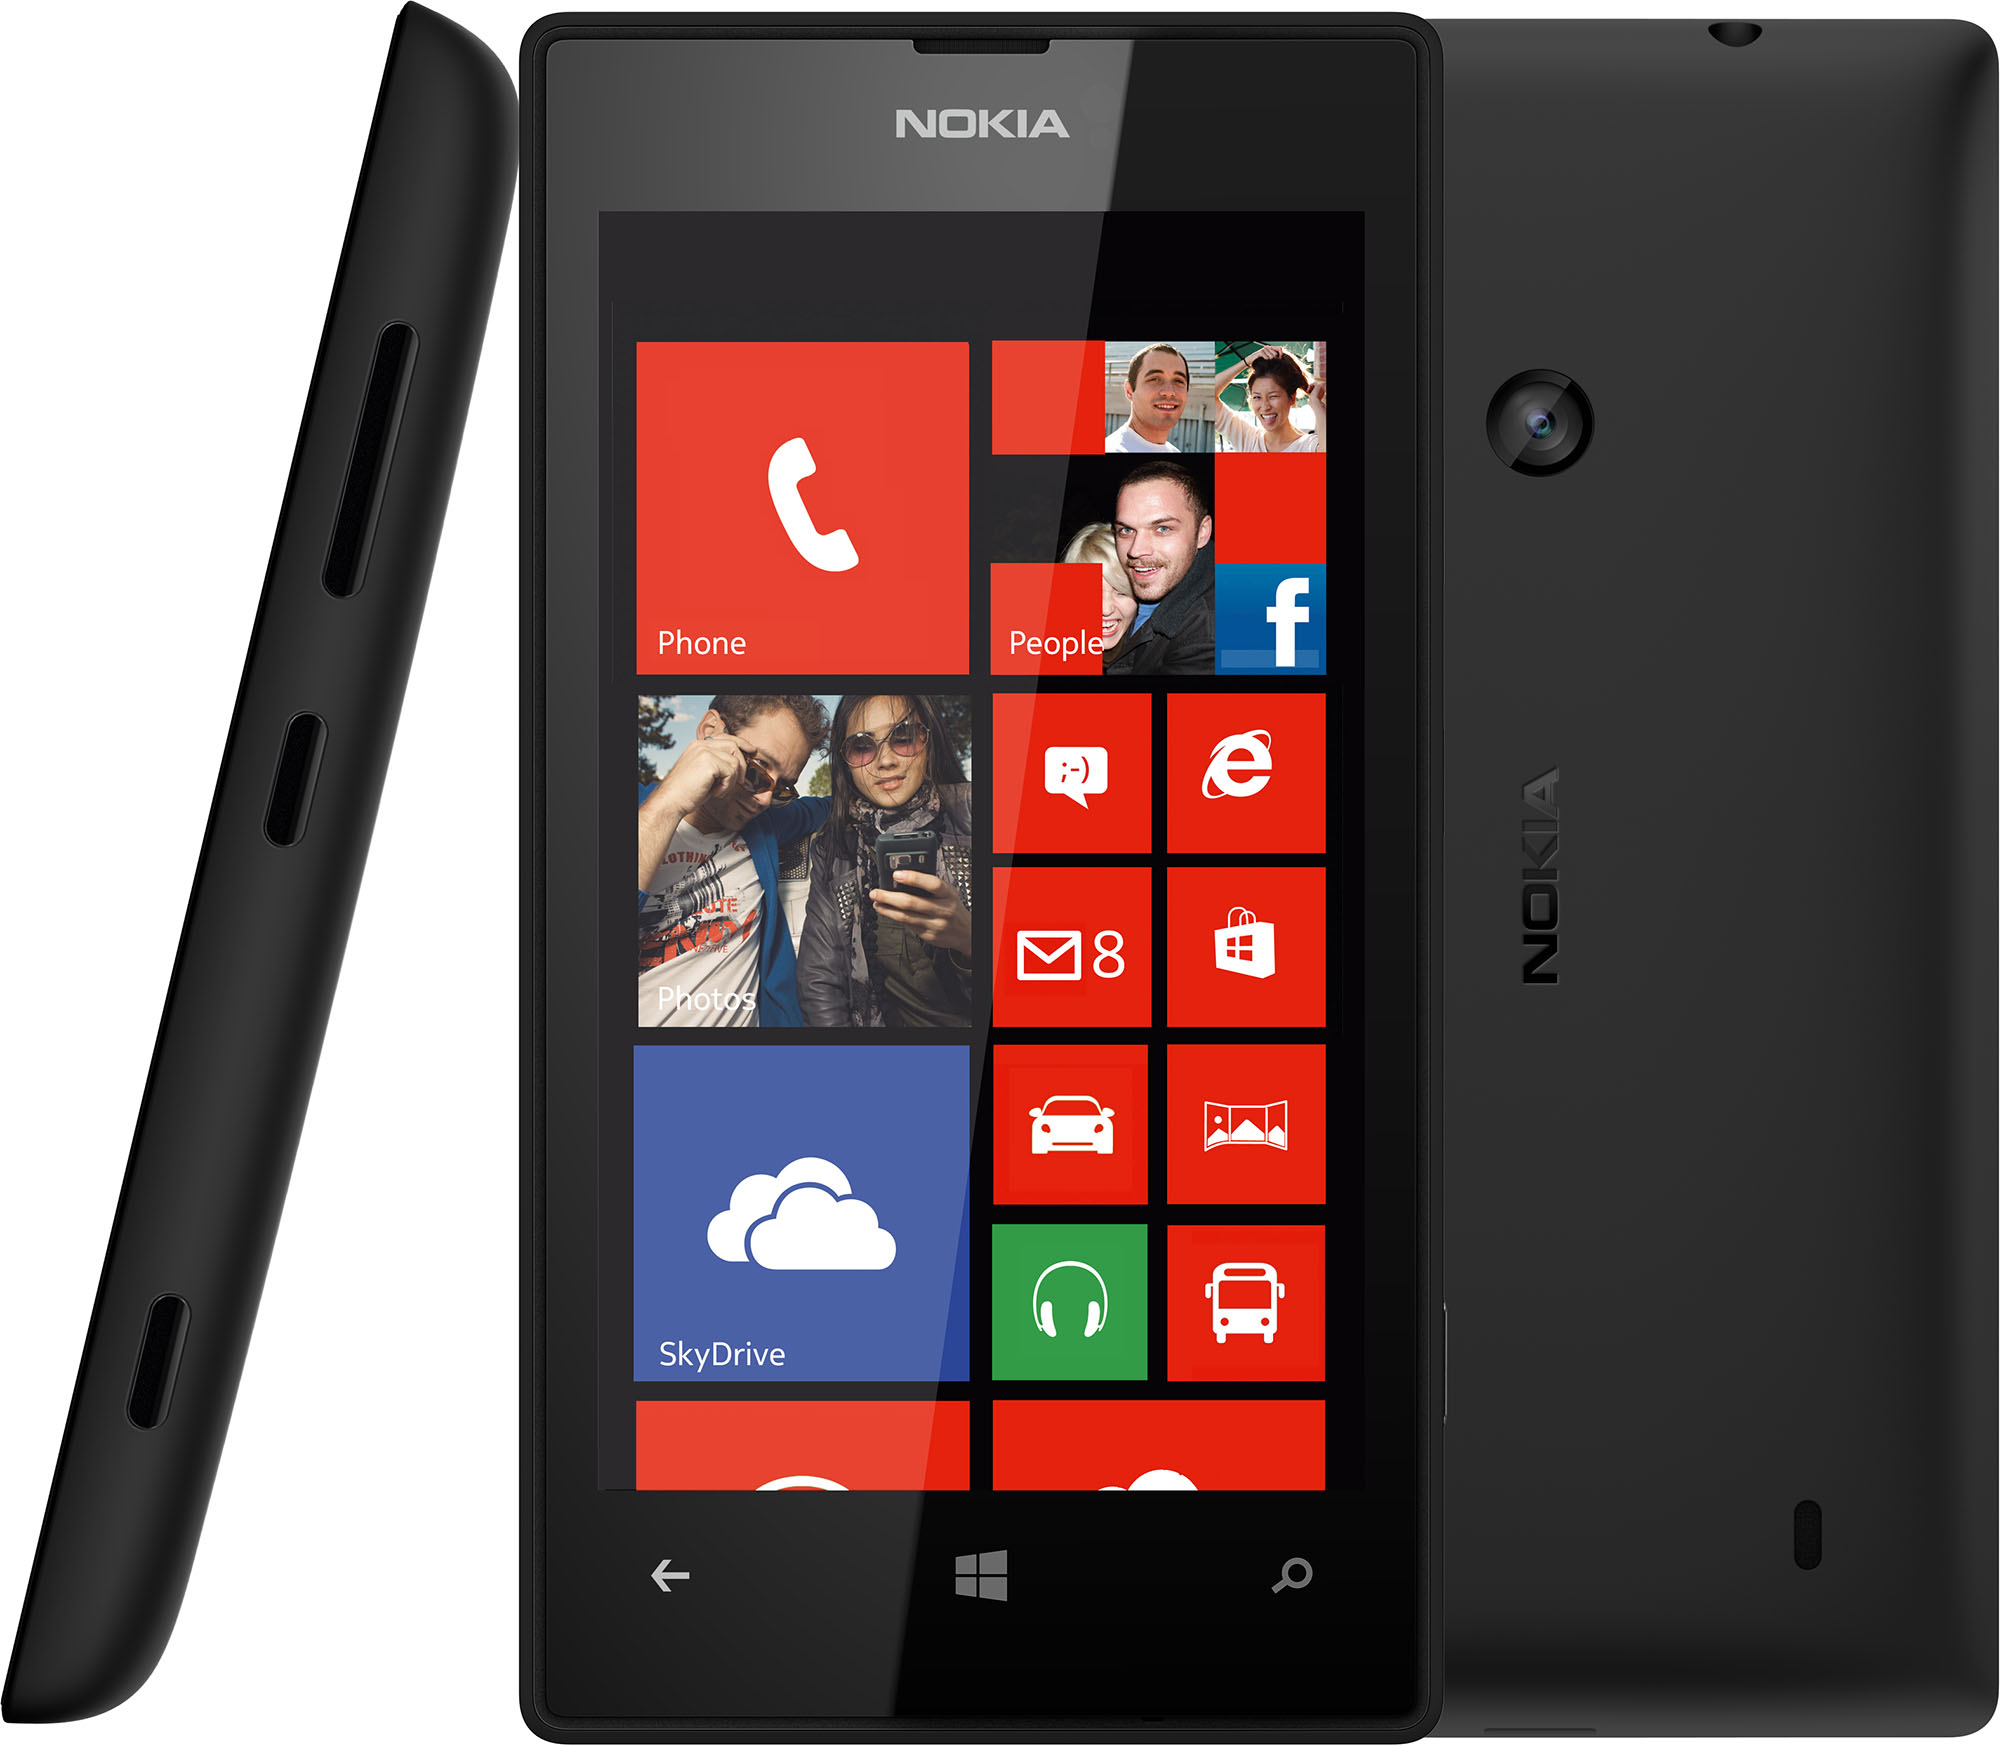 Nokia’s most affordable Windows Phone 8 smartphone